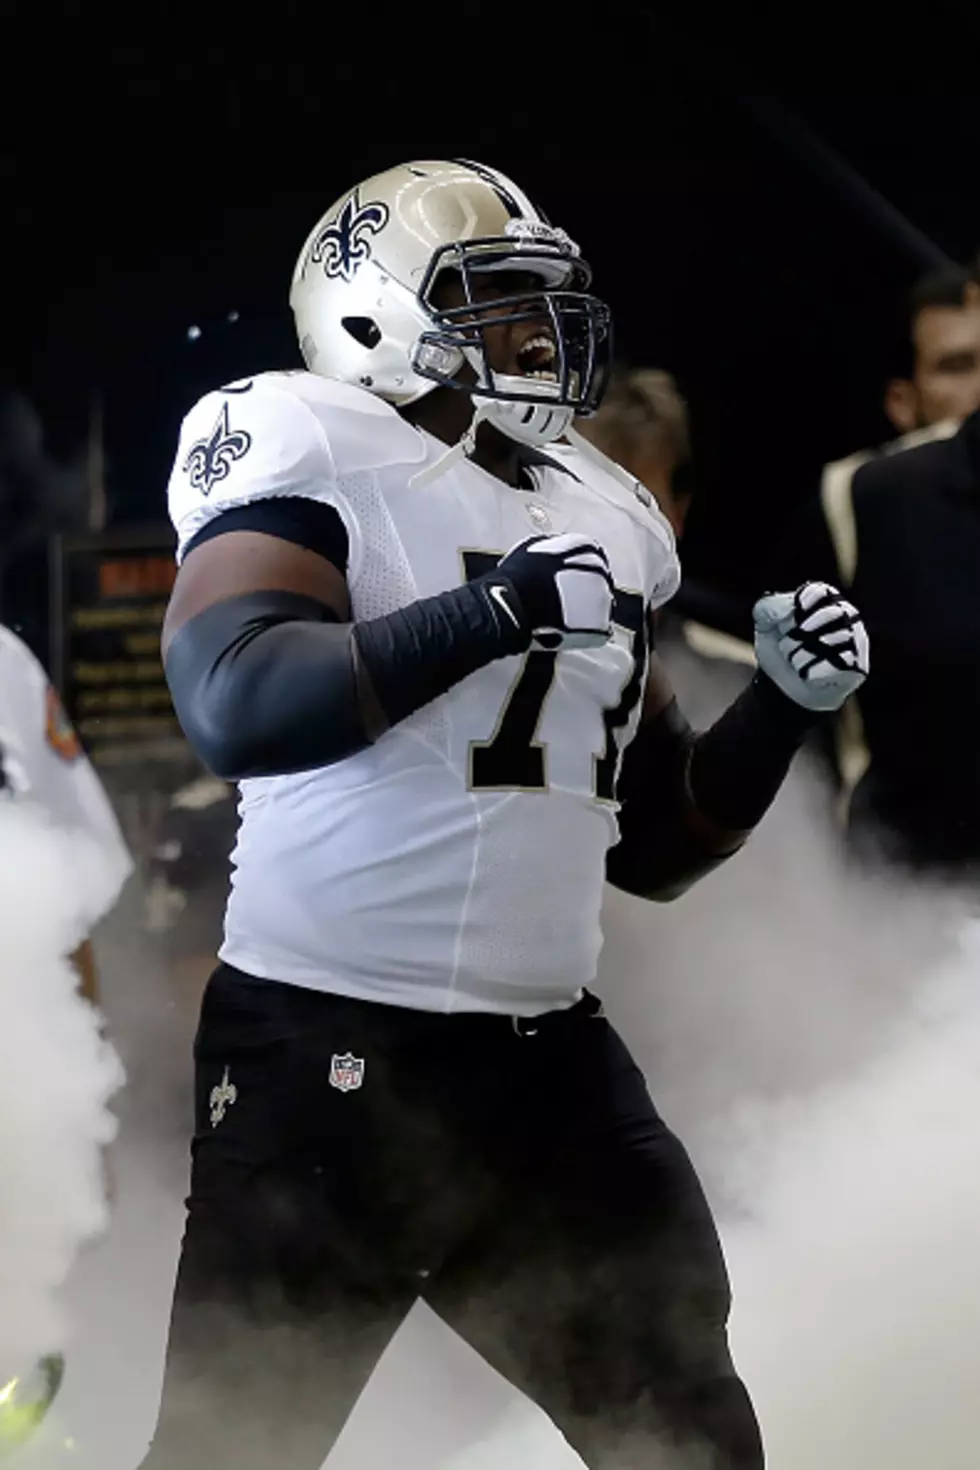 Report: Saints DT Broderick Bunkley Likely Has Torn Quad